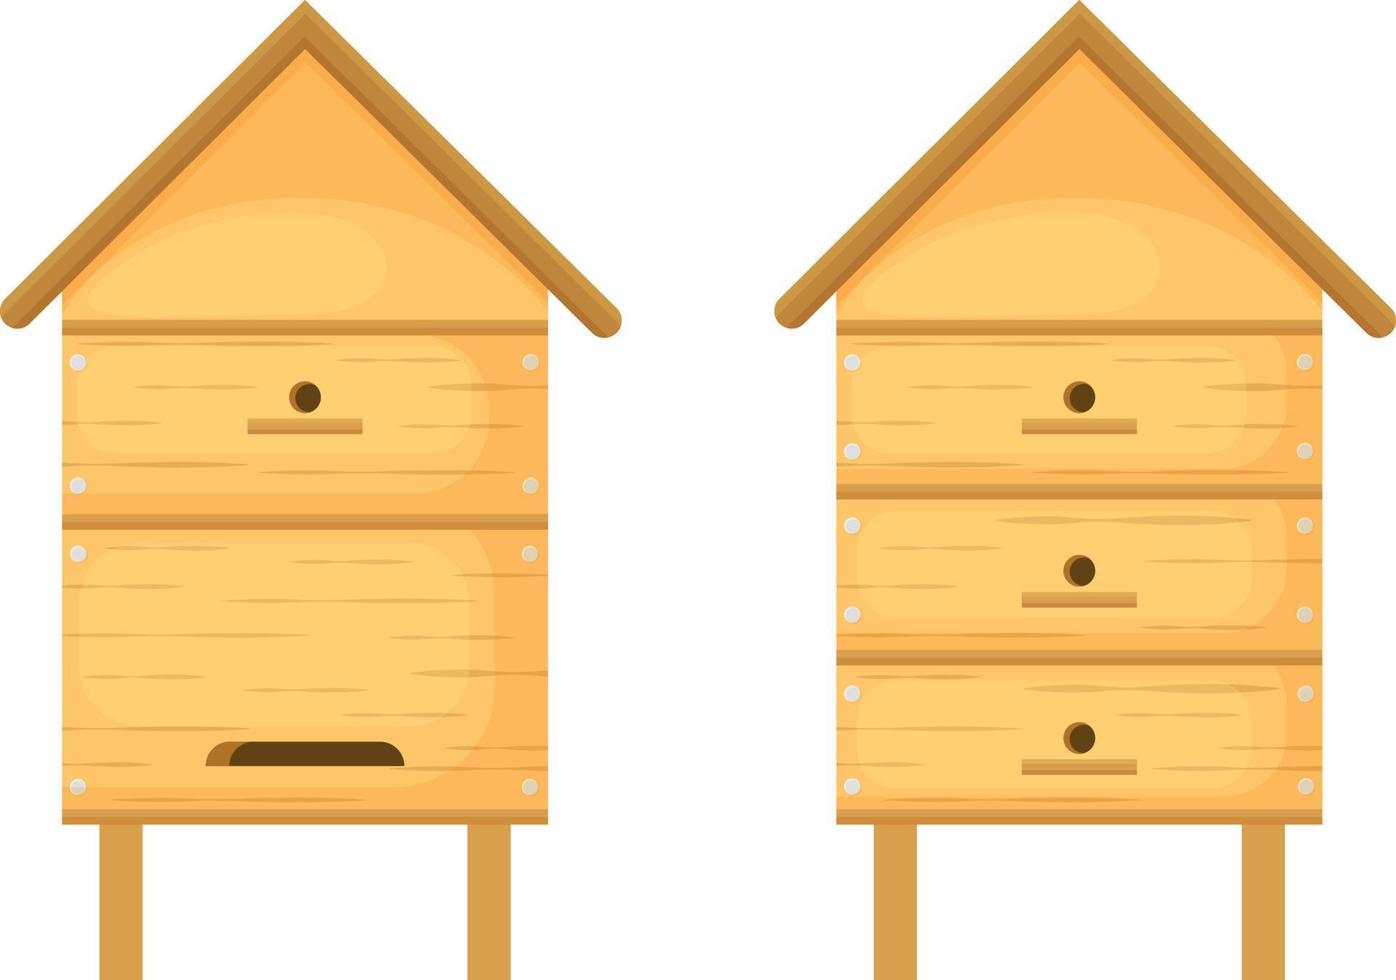 A beehive. A set of wooden beehives for honey bees. Bee houses made of wood in the form of houses. Vector illustration